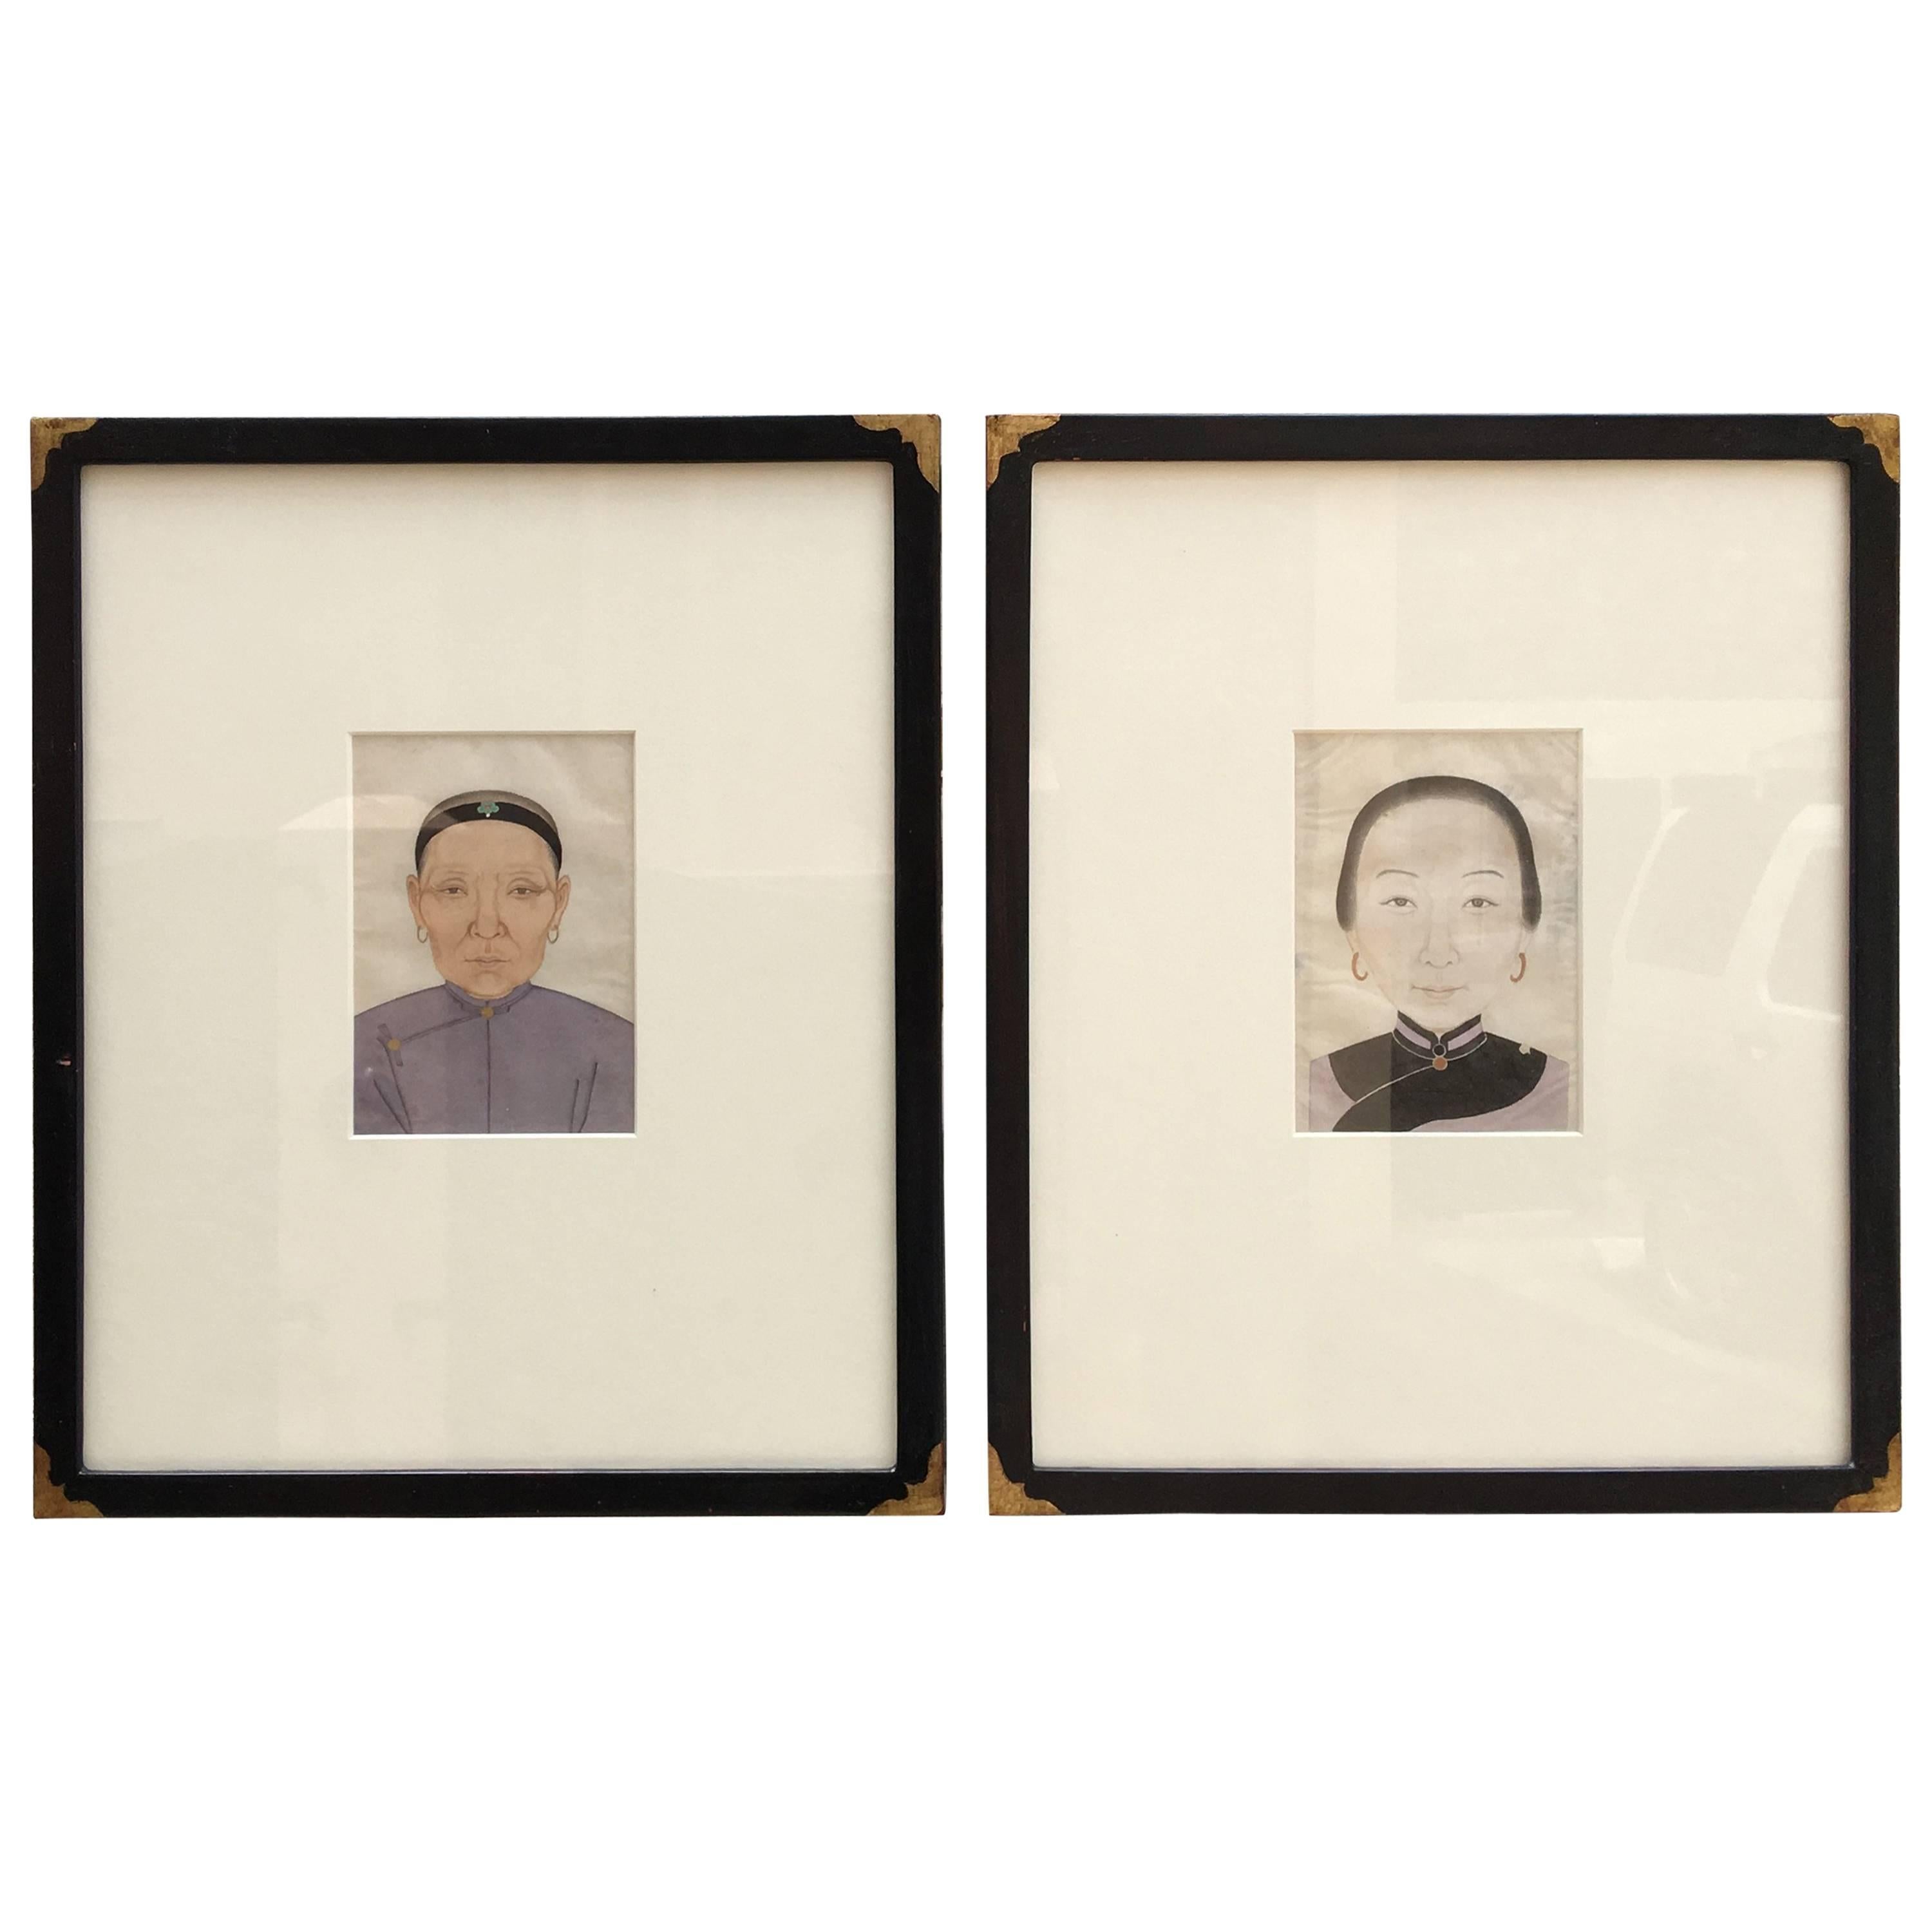 Pair of Small Portraits of Chinese Figures on Rice Paper